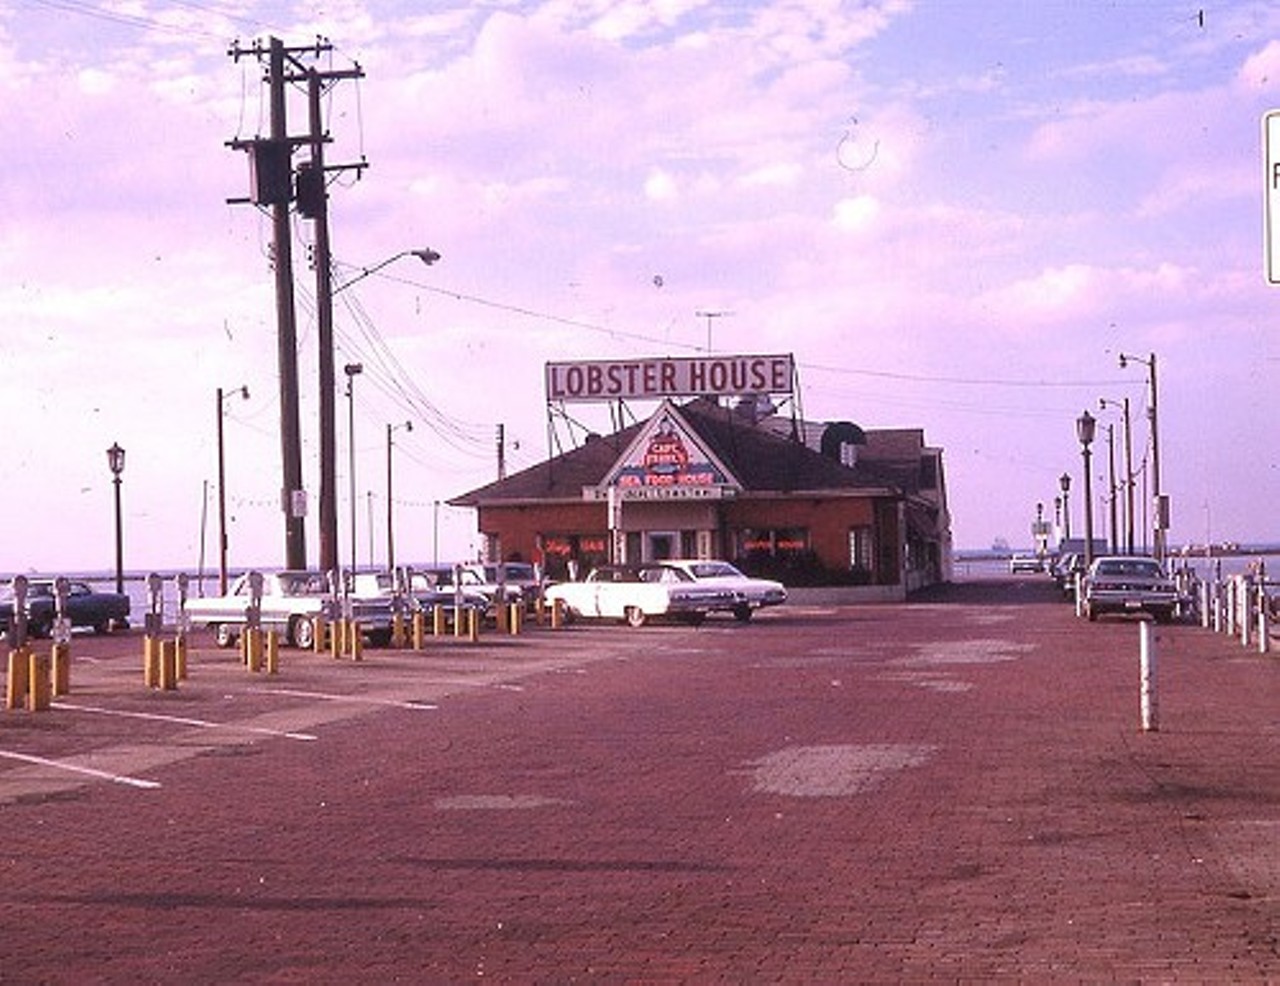 Captain Frank&#146;s
East Ninth Street Pier, Cleveland 
At the end of the East Ninth Pier, before the Rock Hall and the Science Center were there, Captain Frank&#146;s was the place to go, for the &#147;finest and most delightful dinner on the shores of Lake Erie."
Photo via Scene Archives